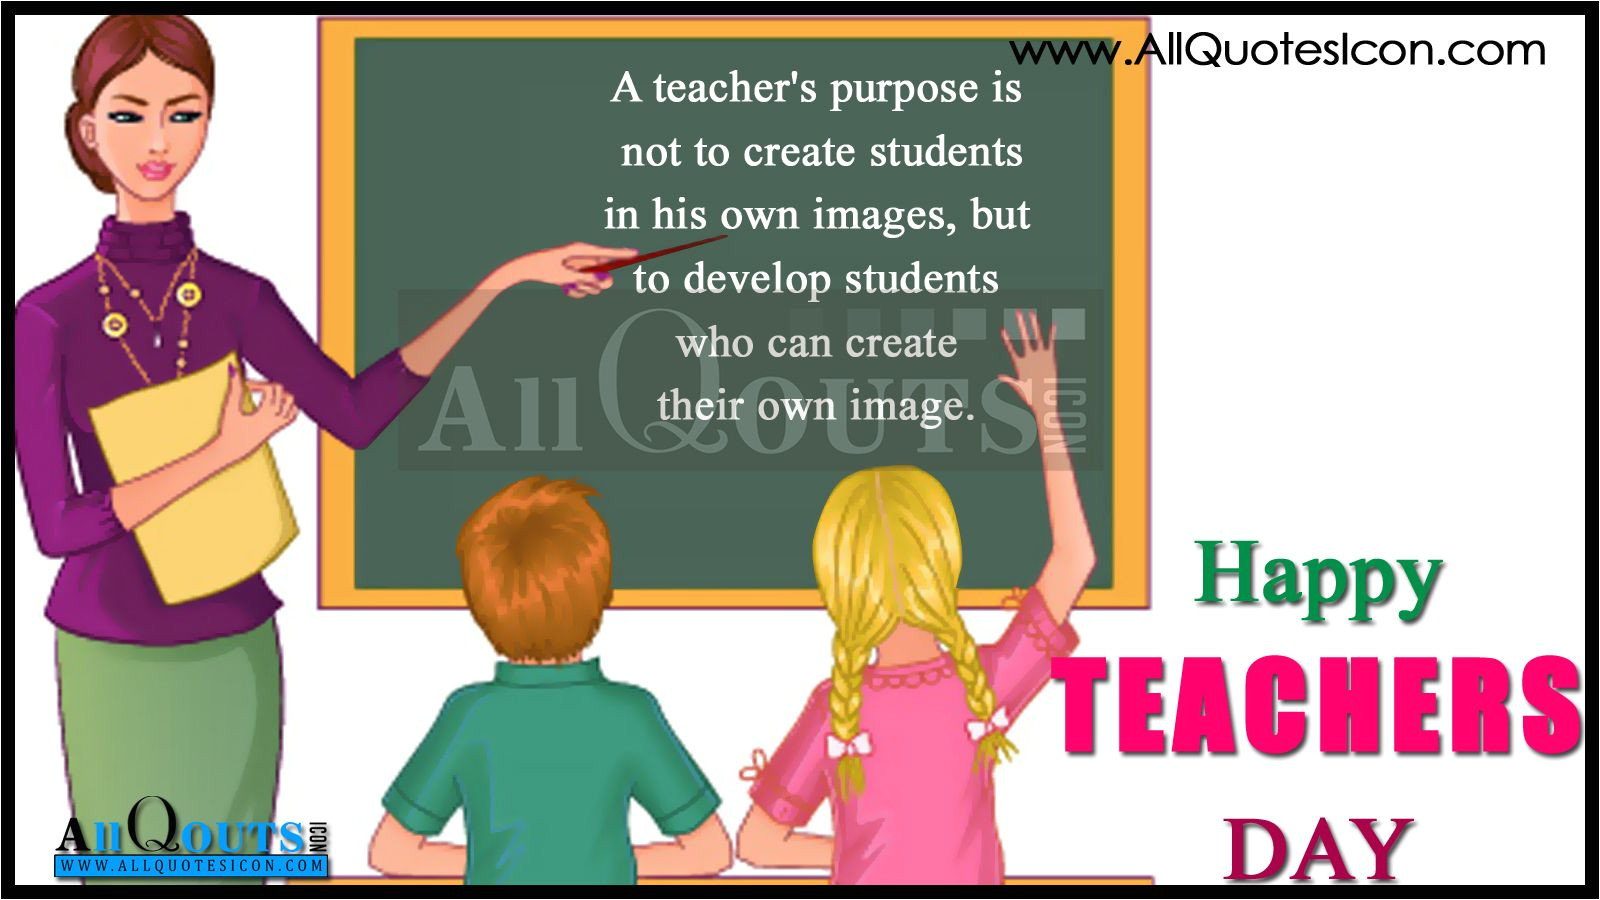 Teachers Day Card by Students 33 Teacher Day Messages to Honor Our Teachers From Students